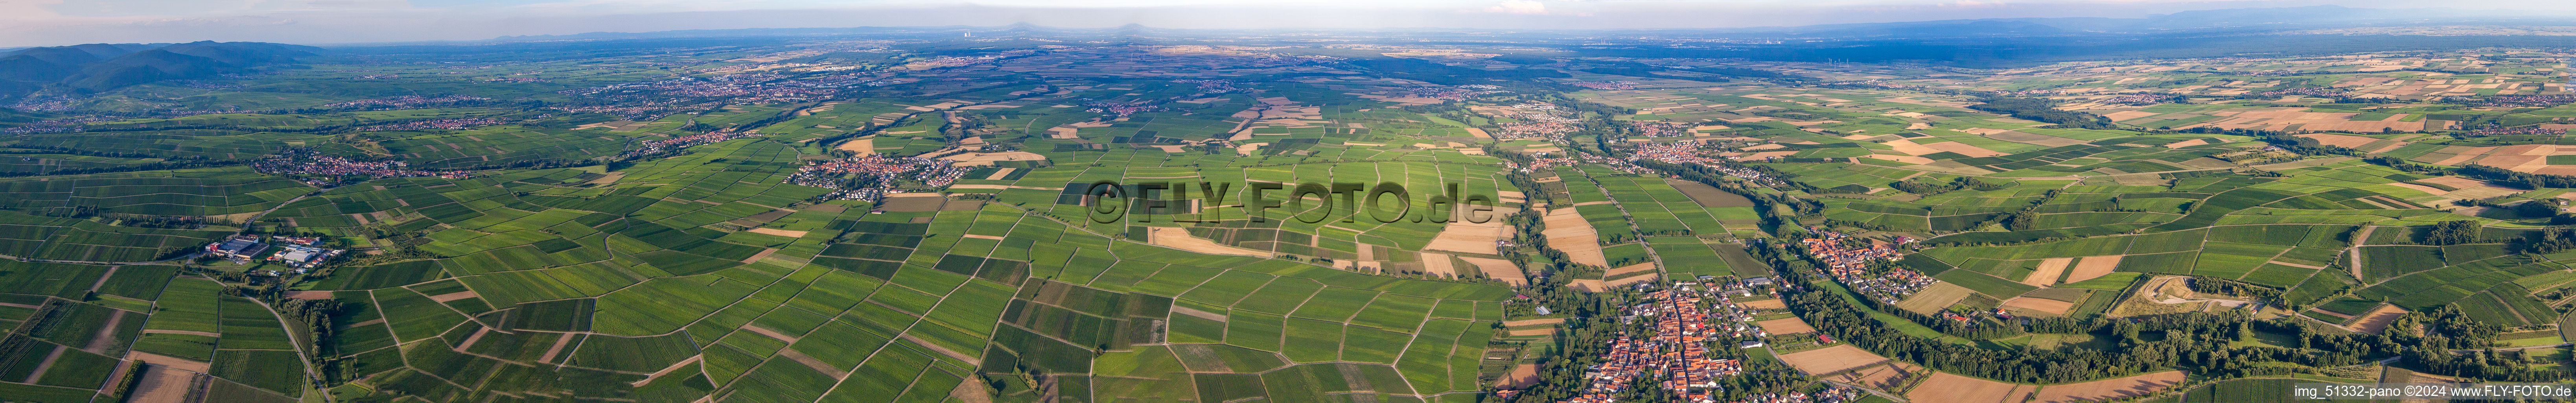 Panoramic perspective of Fields of wine cultivation landscape in the rhine valley near Billigheim-Ingenheim in the state Rhineland-Palatinate, Germany